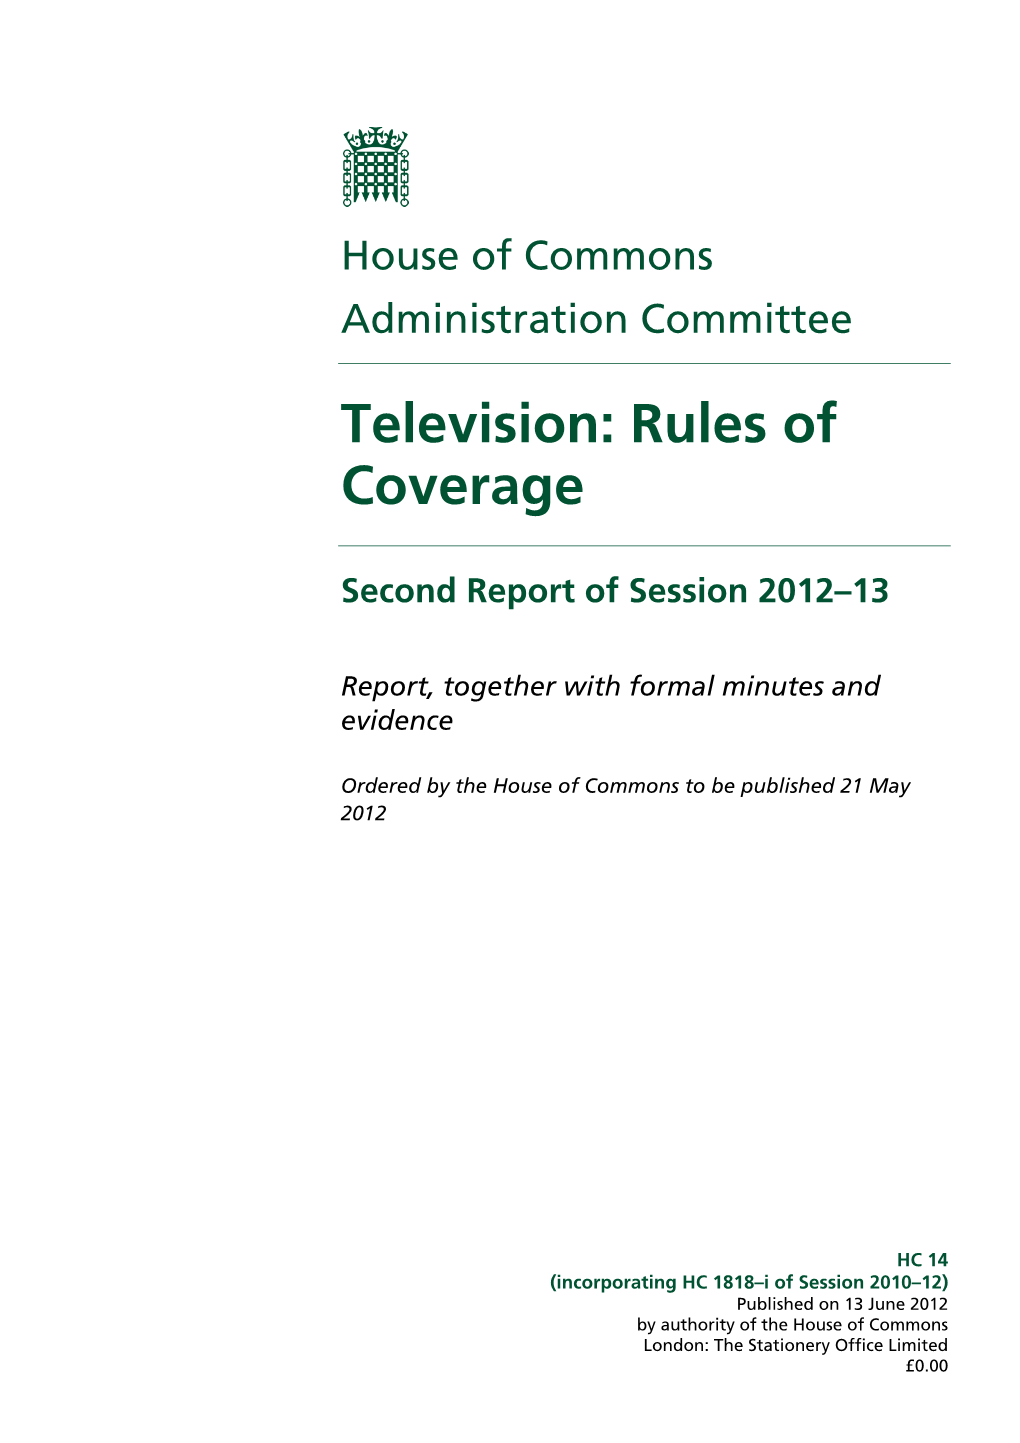 Television: Rules of Coverage